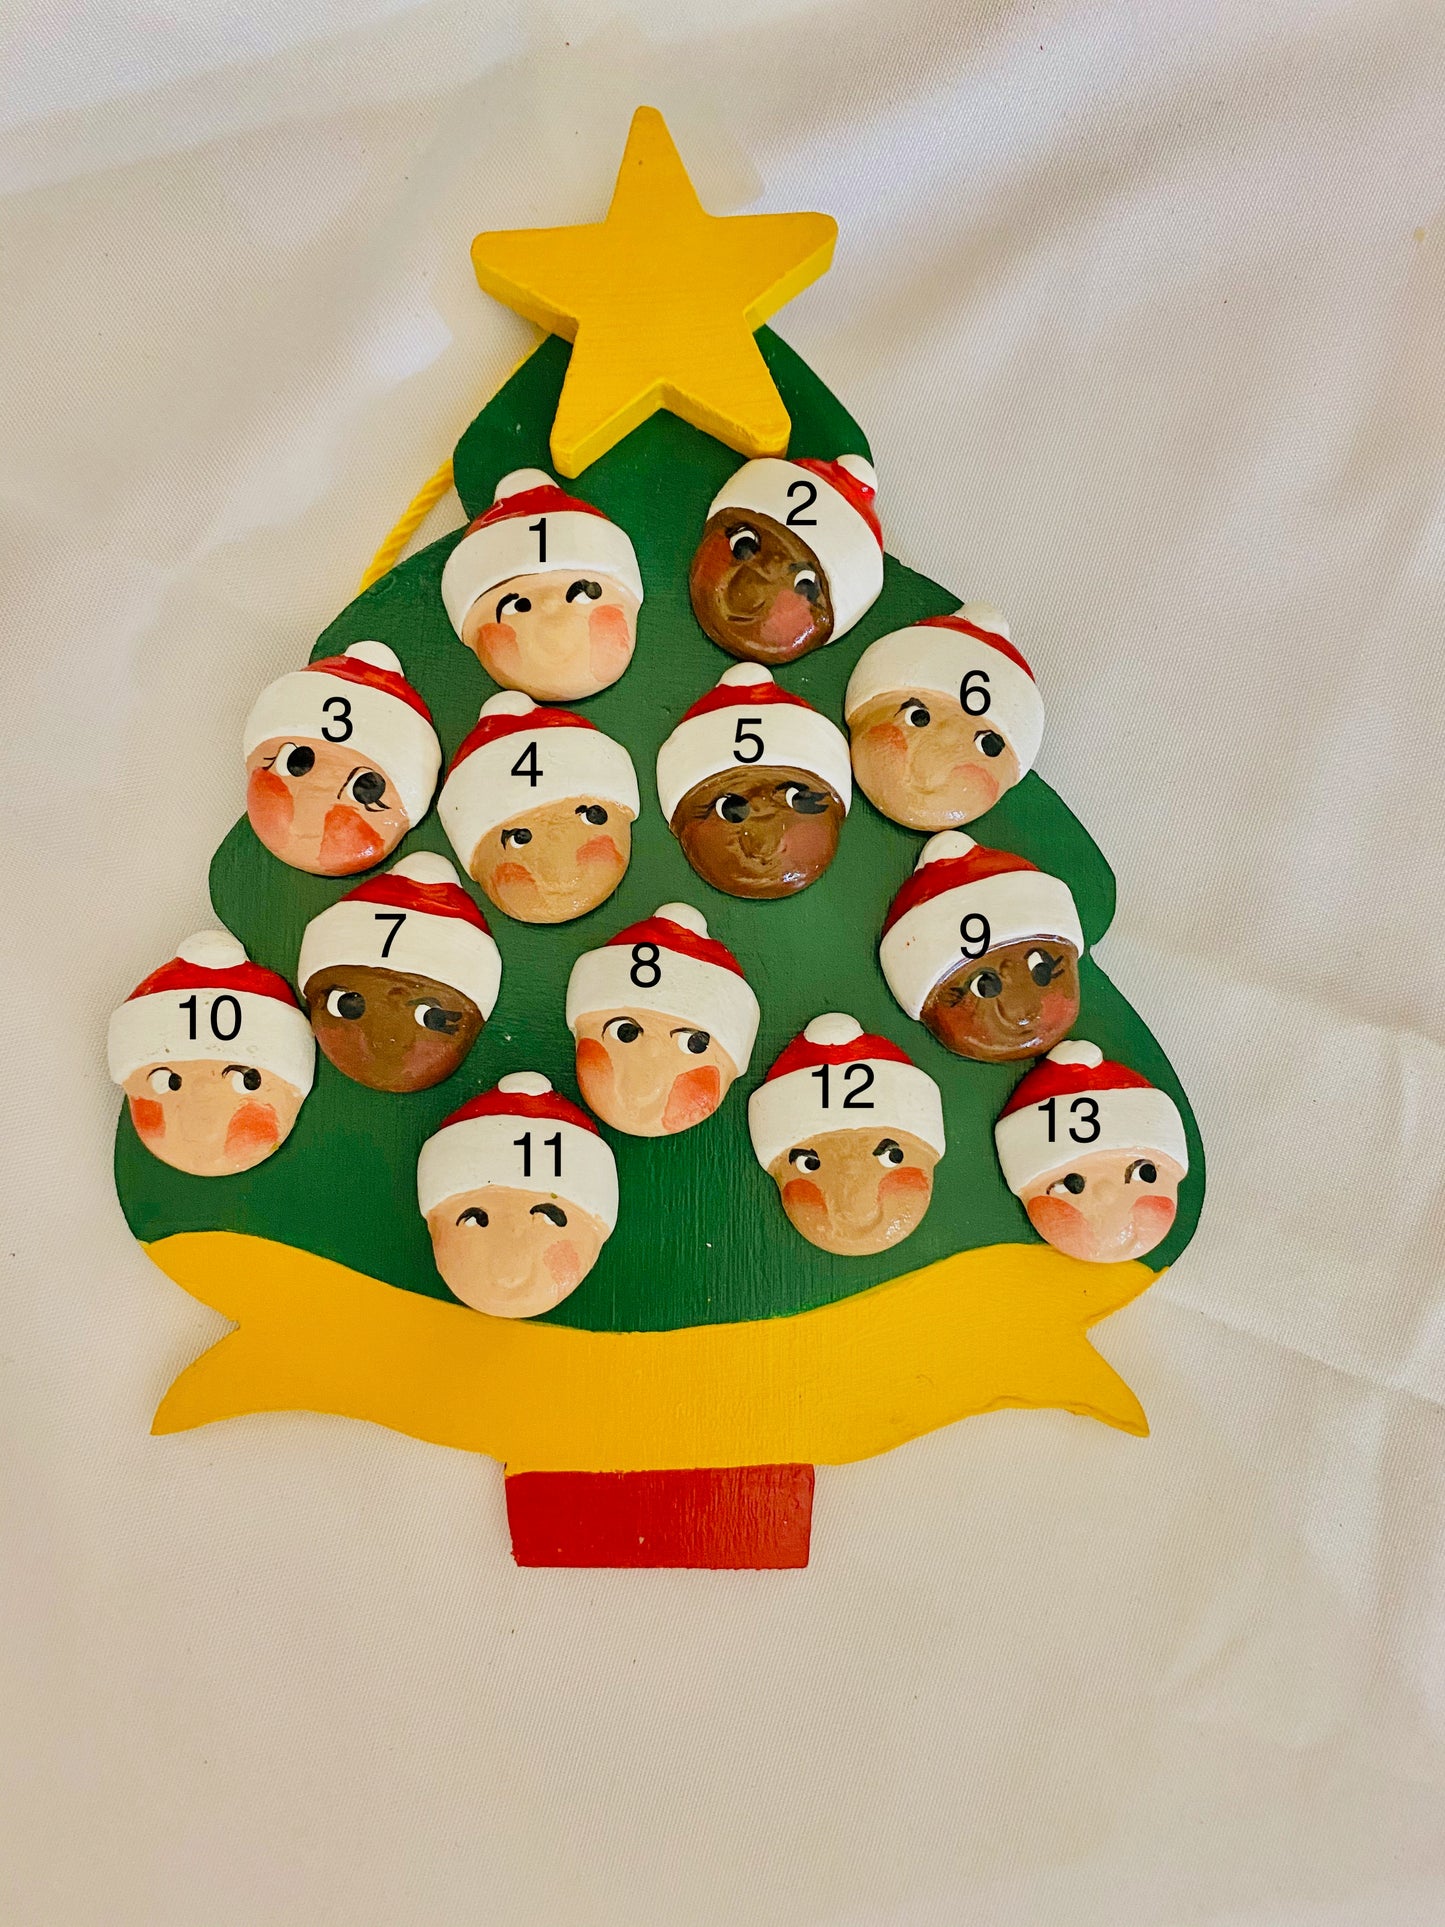 Personalized Ornament  13 Santa Faces on a Christmas Tree  6" x 4.5"